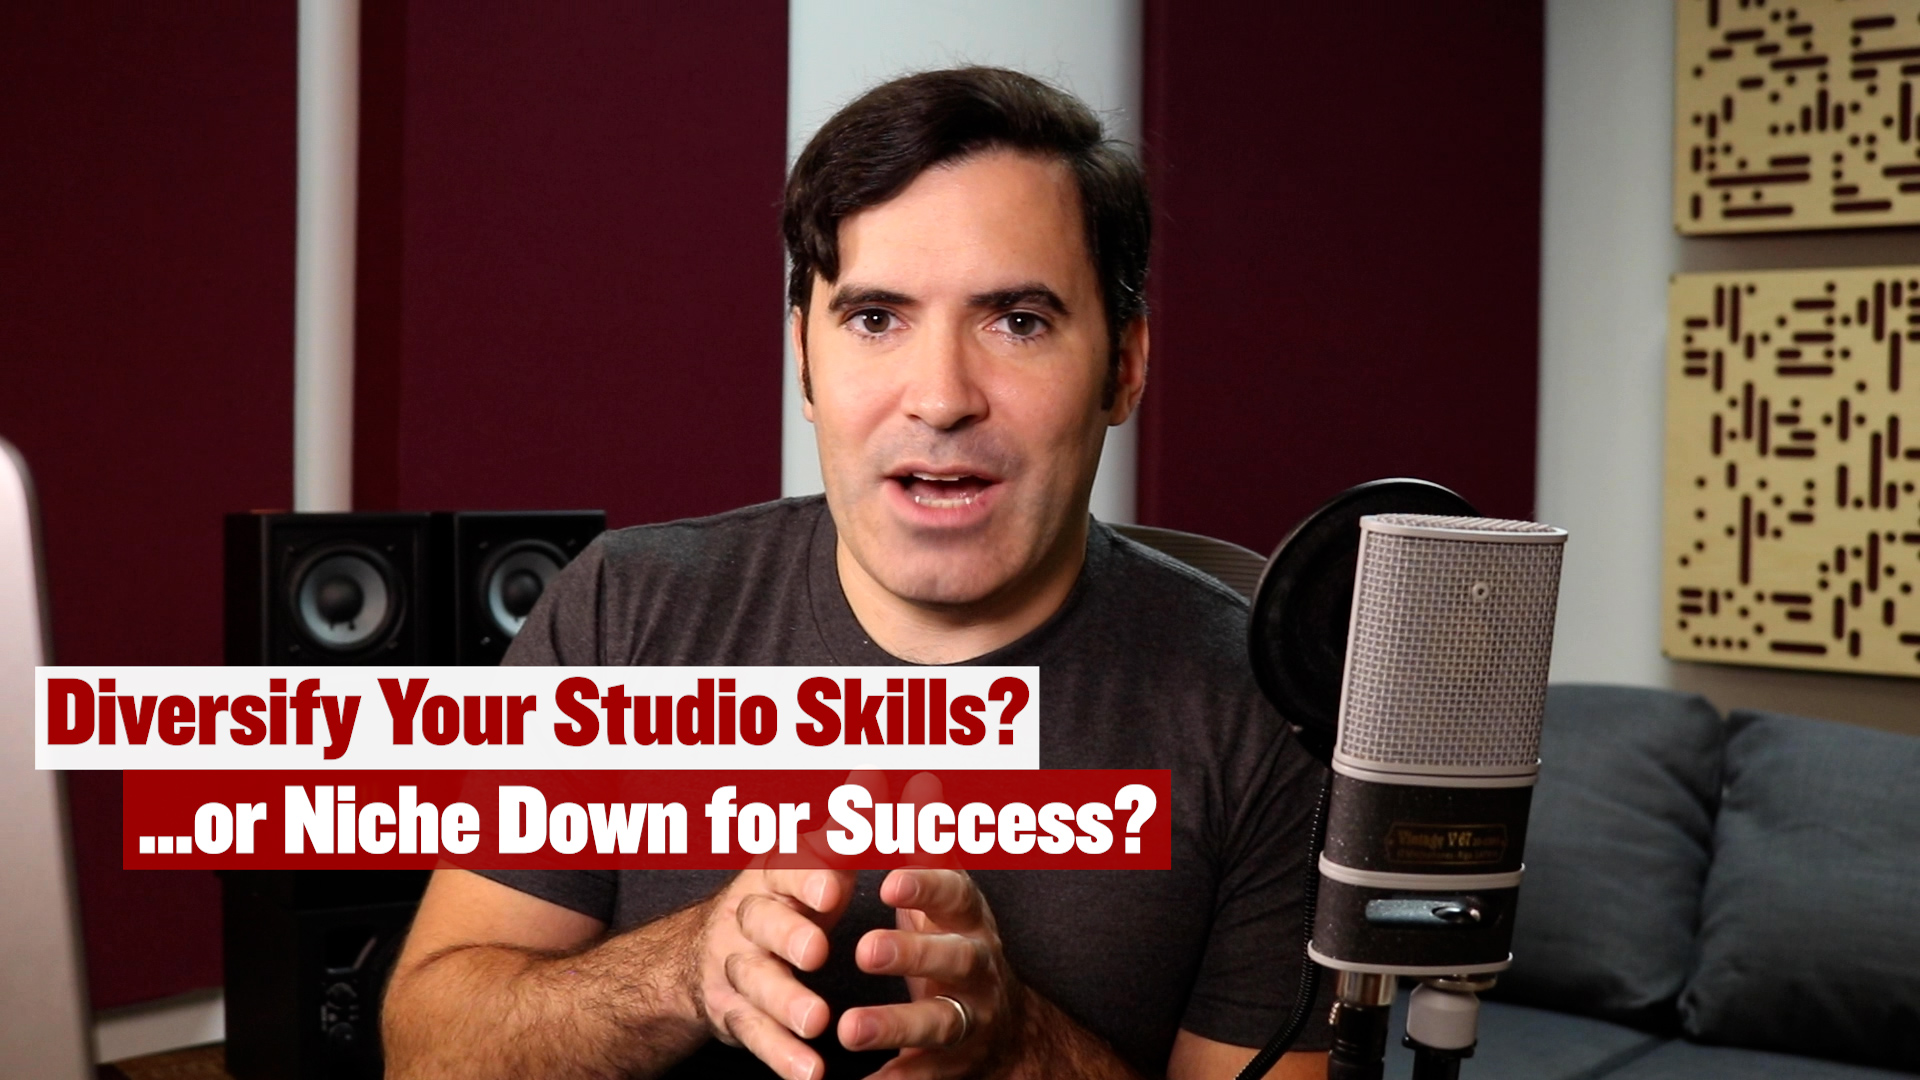 To Succeed in the Studio, Should You Diversify Your Skills or Niche Down?